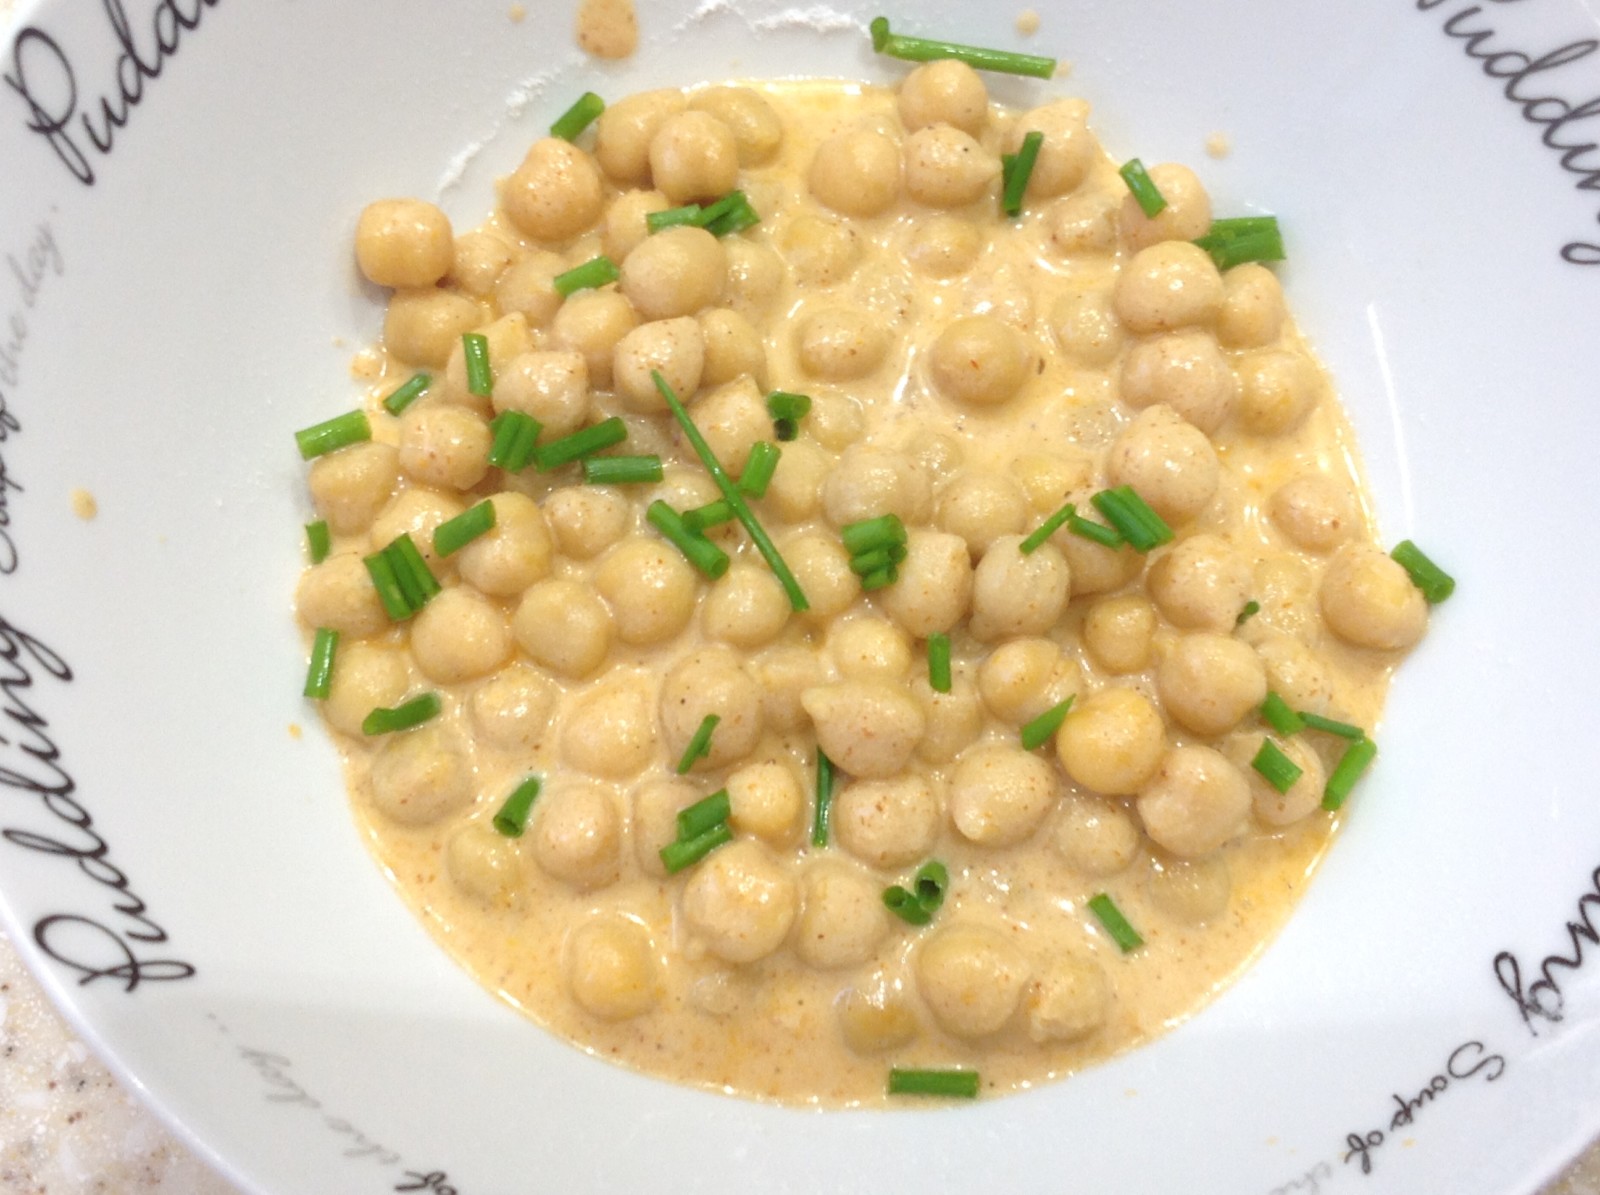 Spicy chickpeas 